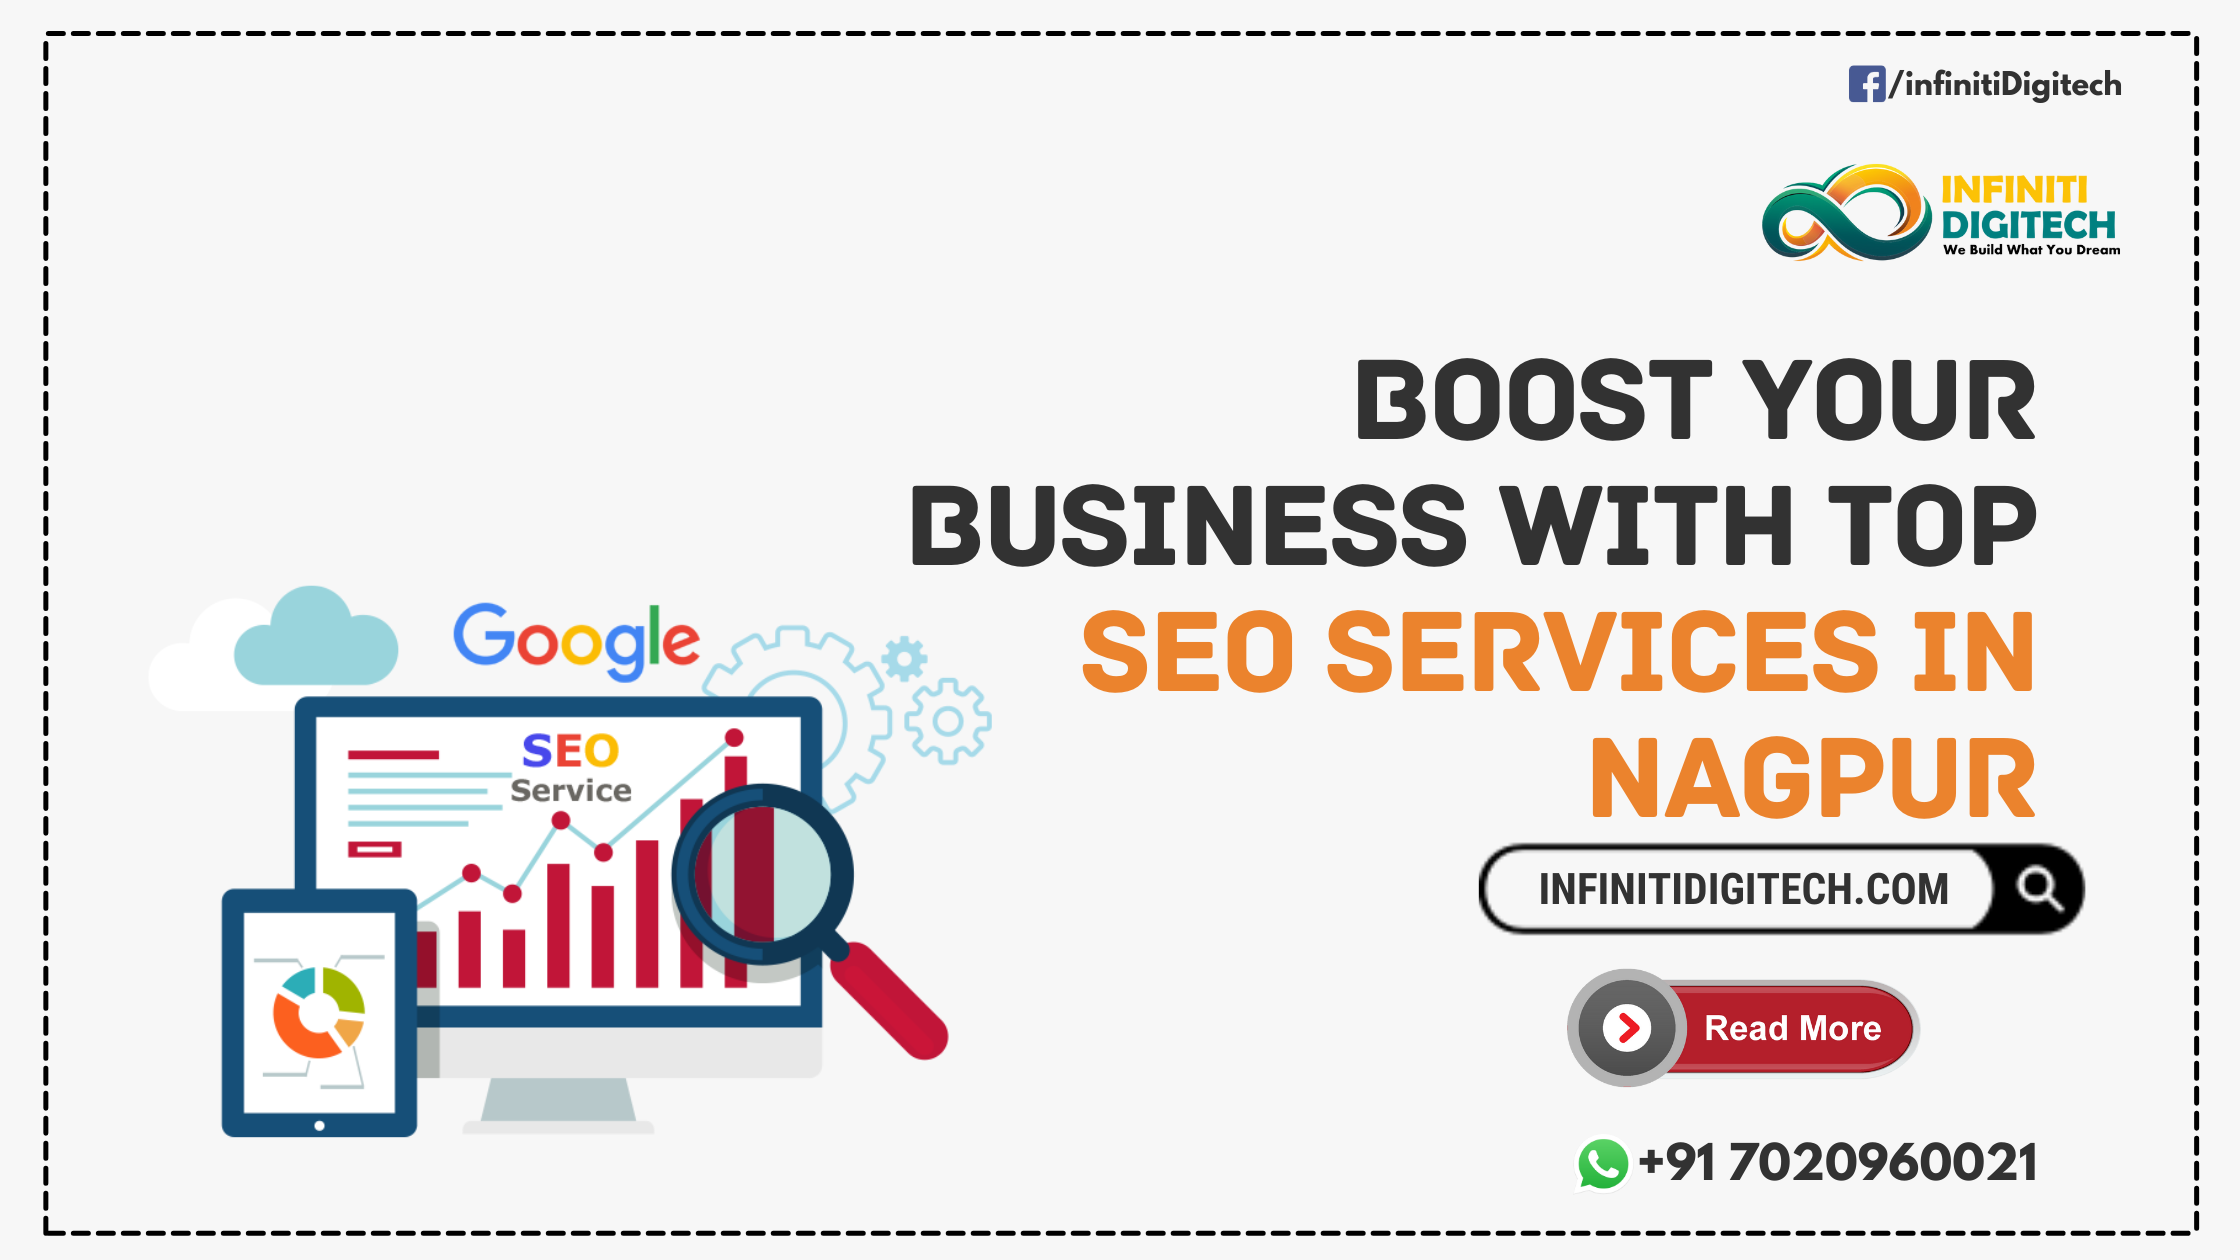 Discover how to enhance your business's online visibility and growth with the best SEO services in Nagpur. Get insights, FAQs, and expert advice on boosting your business through effective search engine optimization.